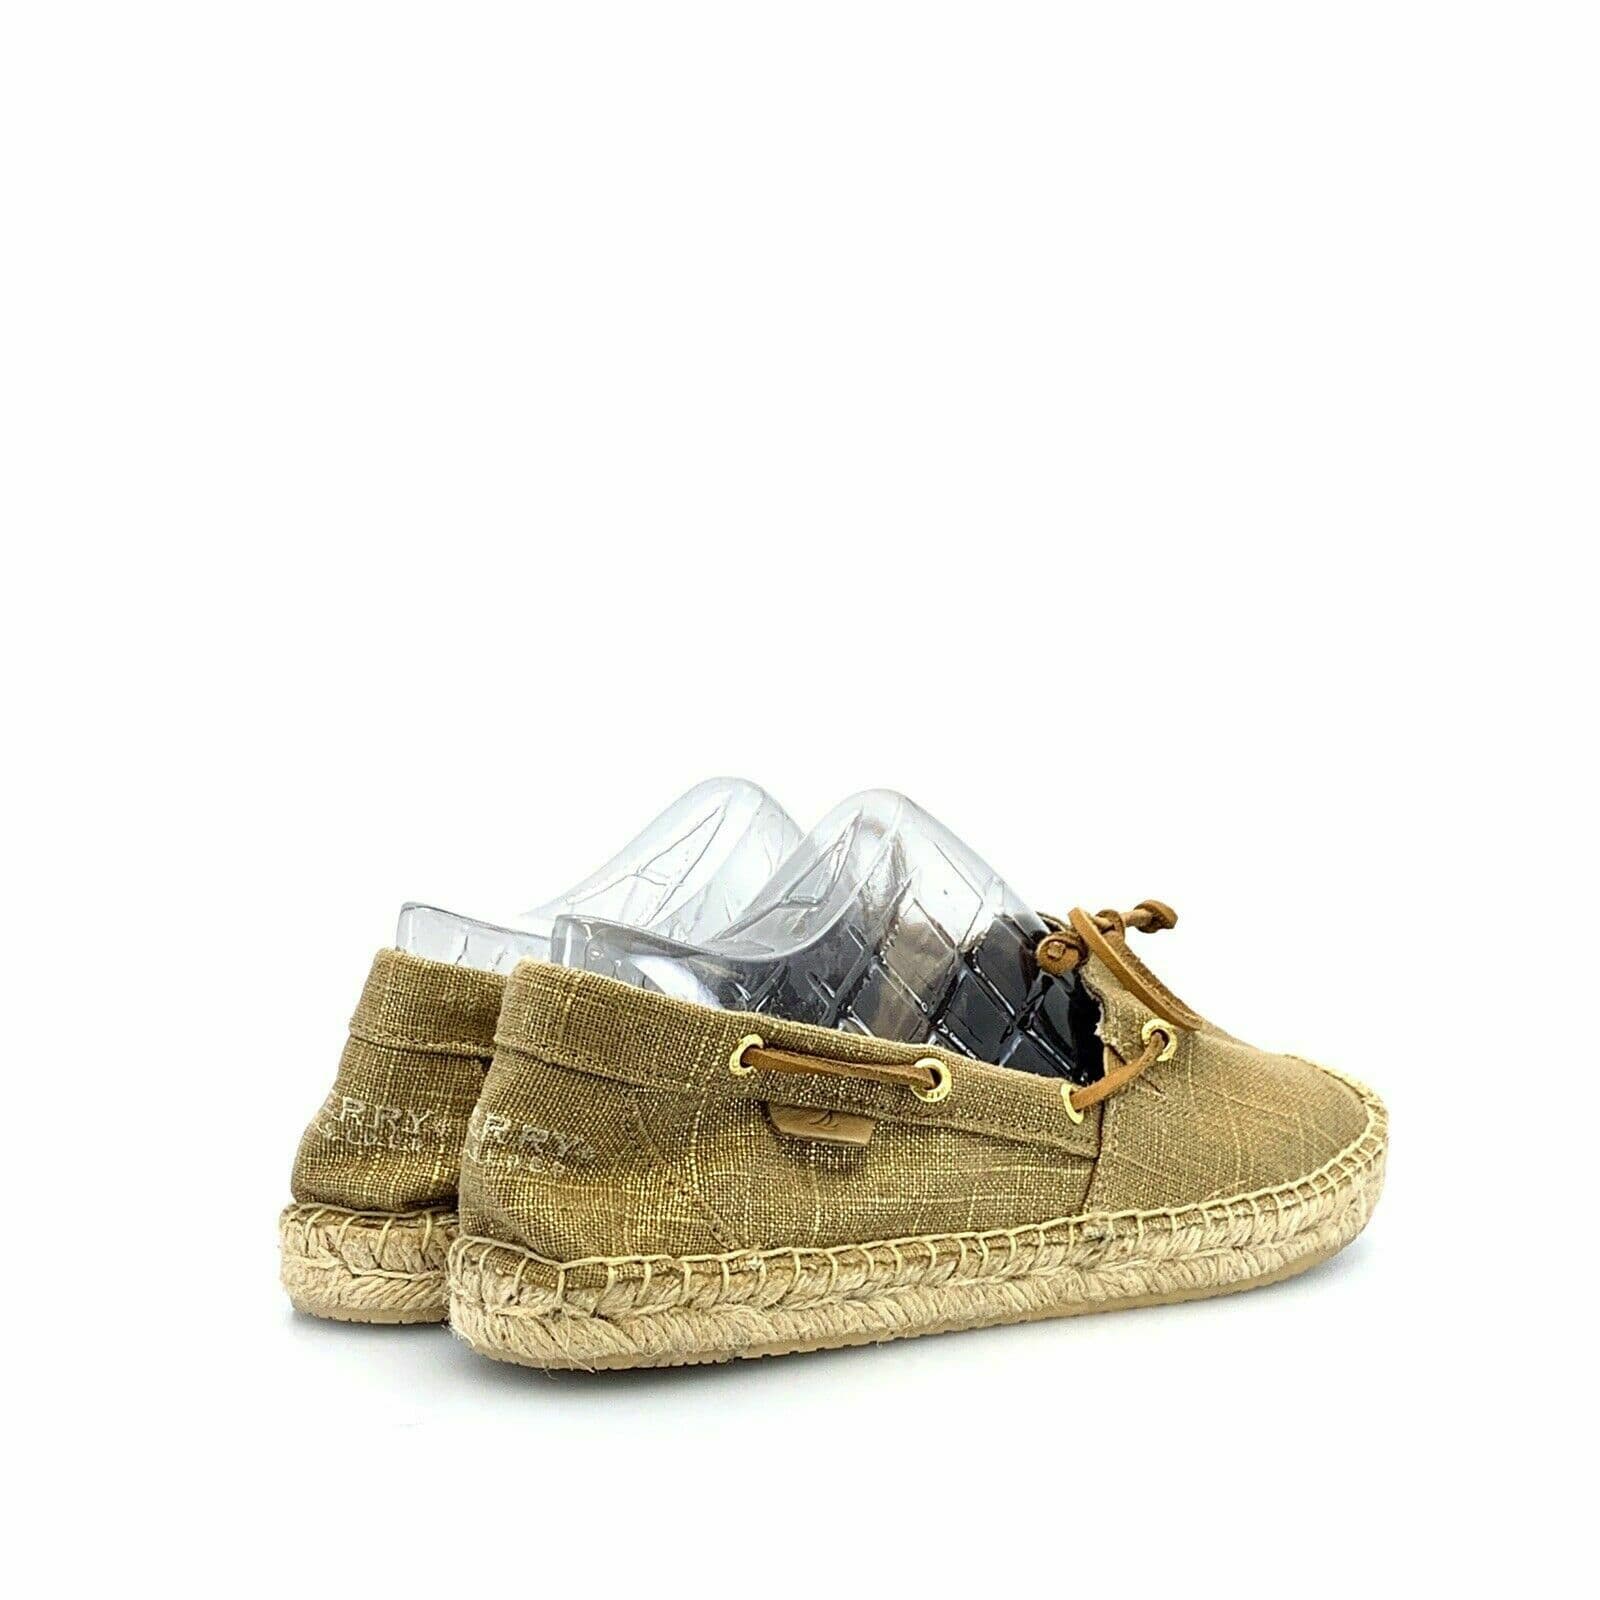 Sperry Top Sider Womens Shoes Size 9 Gold Canvas Slip On - parsimonyshoppes